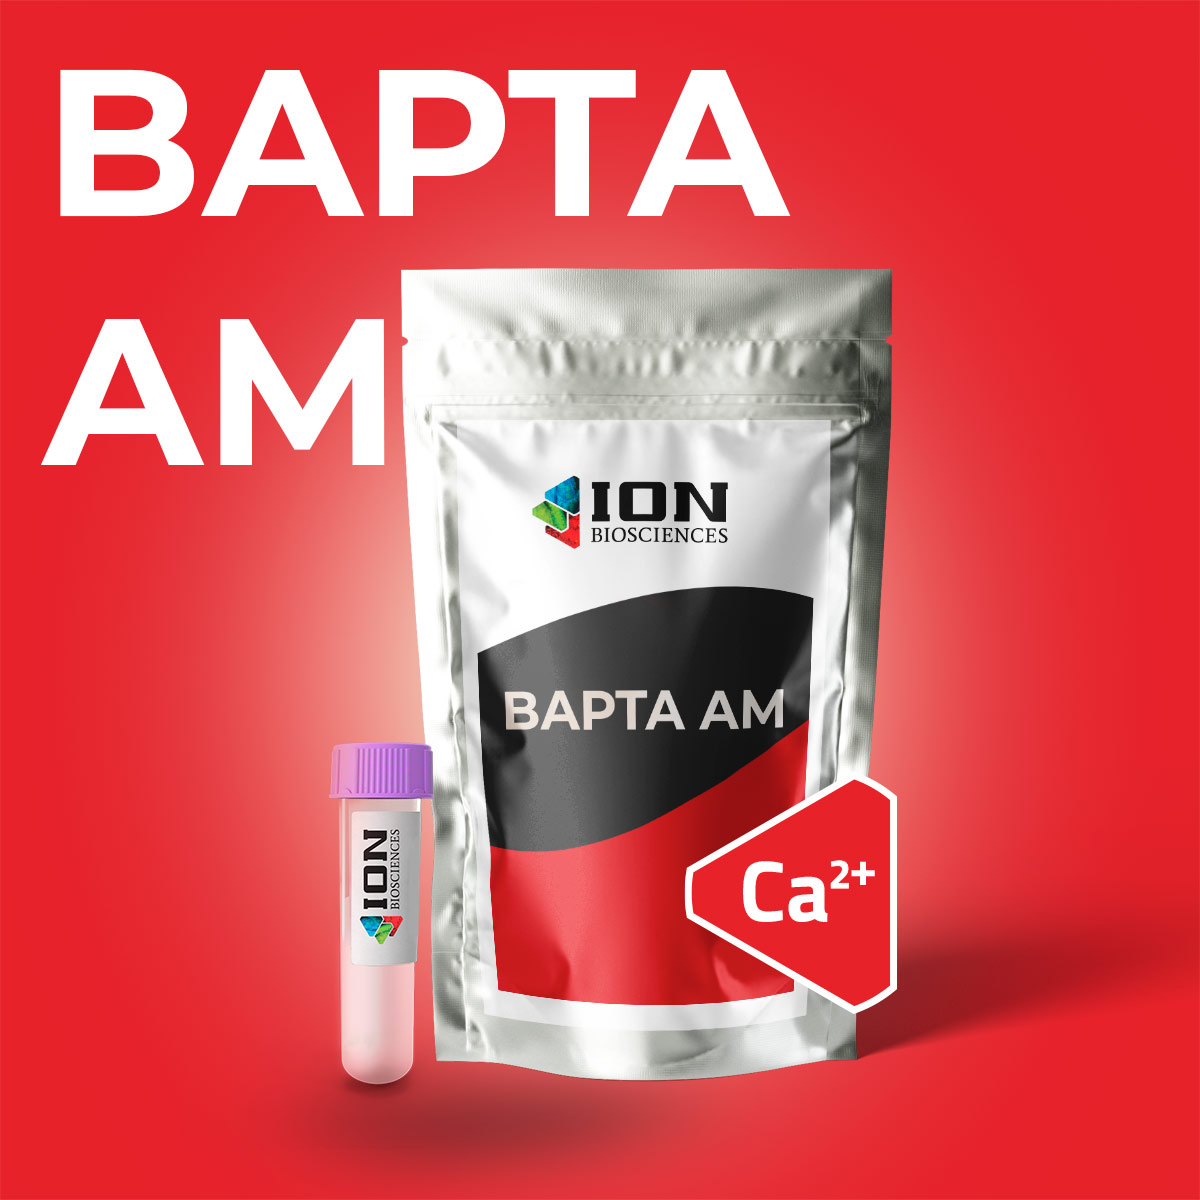 BAPTA AM packaging with calcium chelator sticker, red background